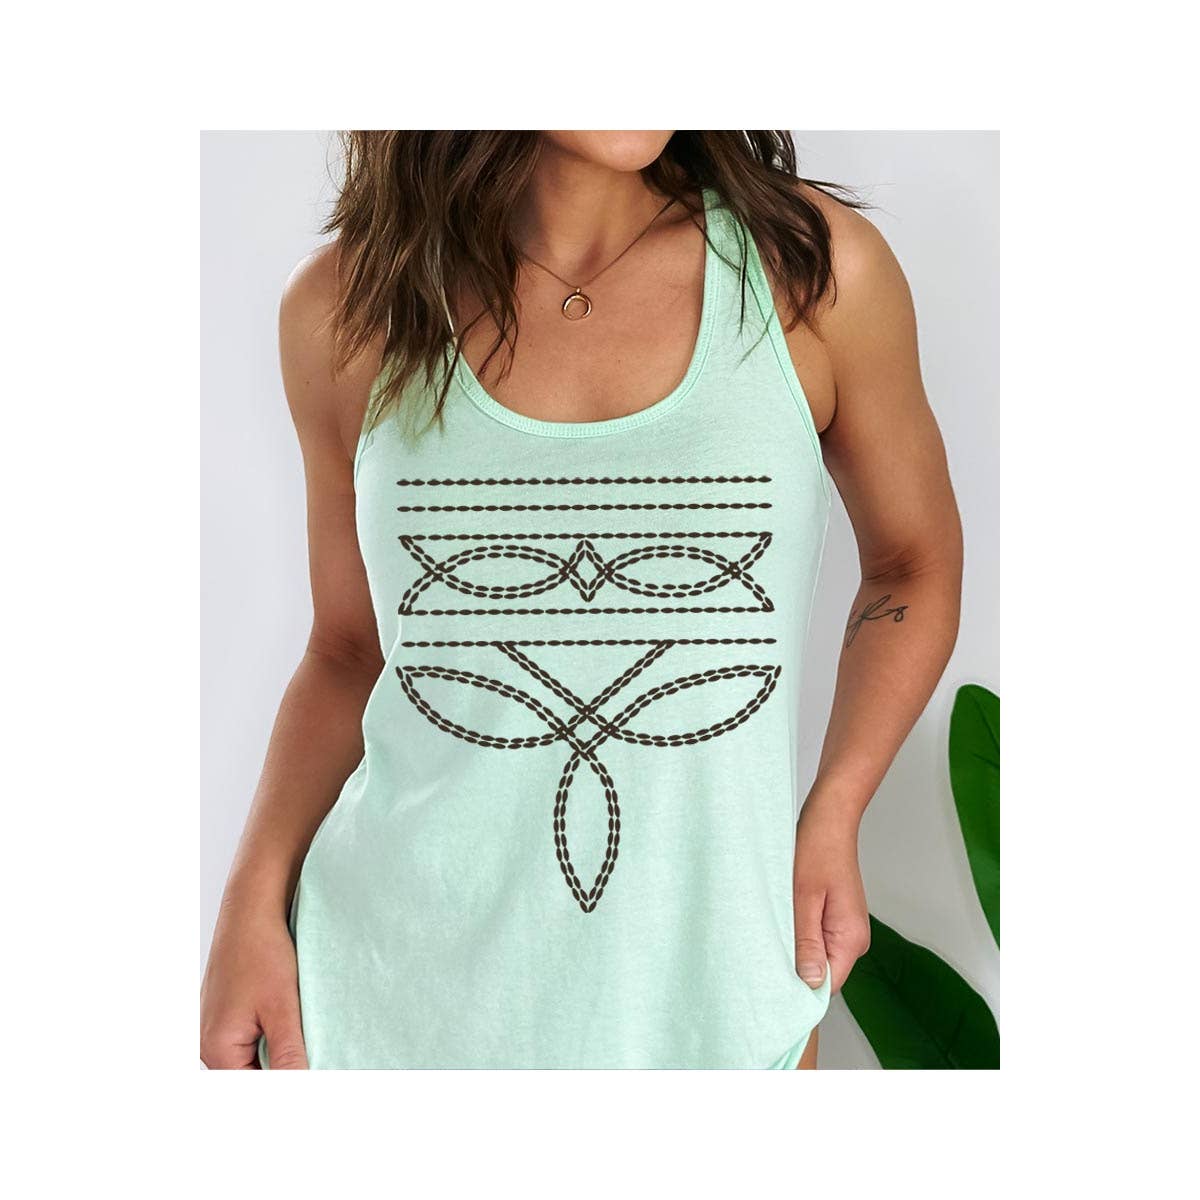 Western Boot Stitch Graphic Racerback Tank Top (2 Colors)